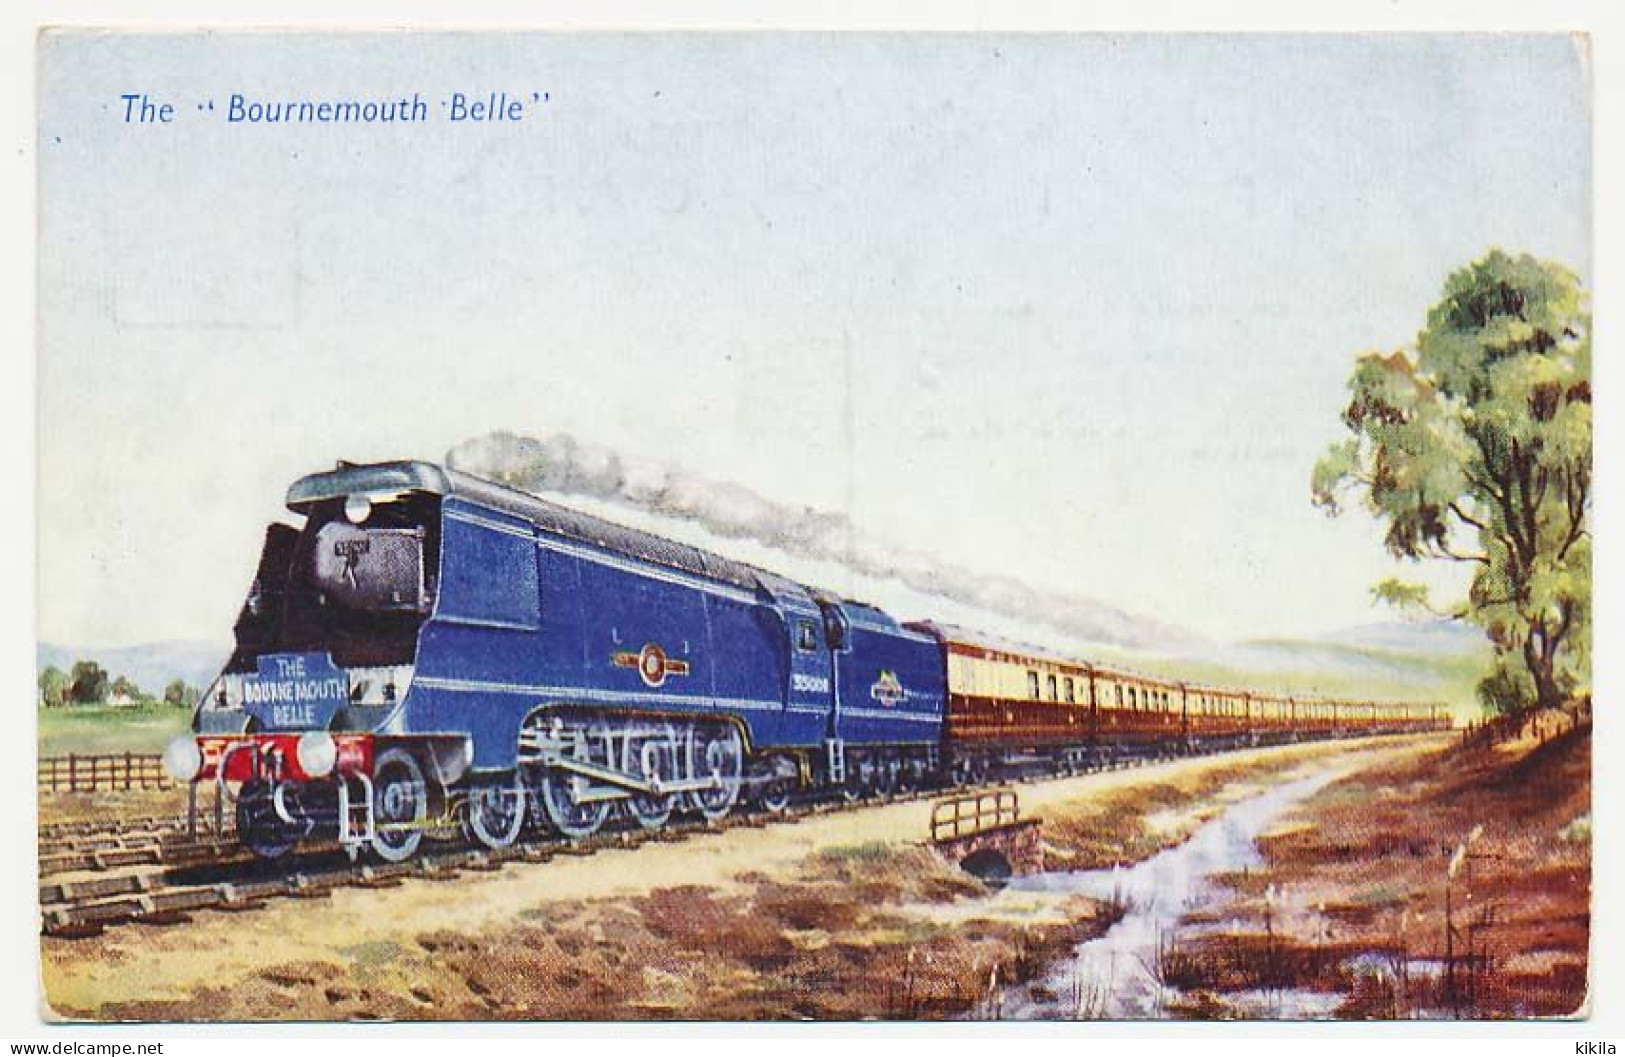 CPSM 9 X 14 Angleterre (262)  Train Locomotive The "Bournemouth Belle Hauled By Merchant Navy" Class 4.6.2 "Pacific" * - Treni